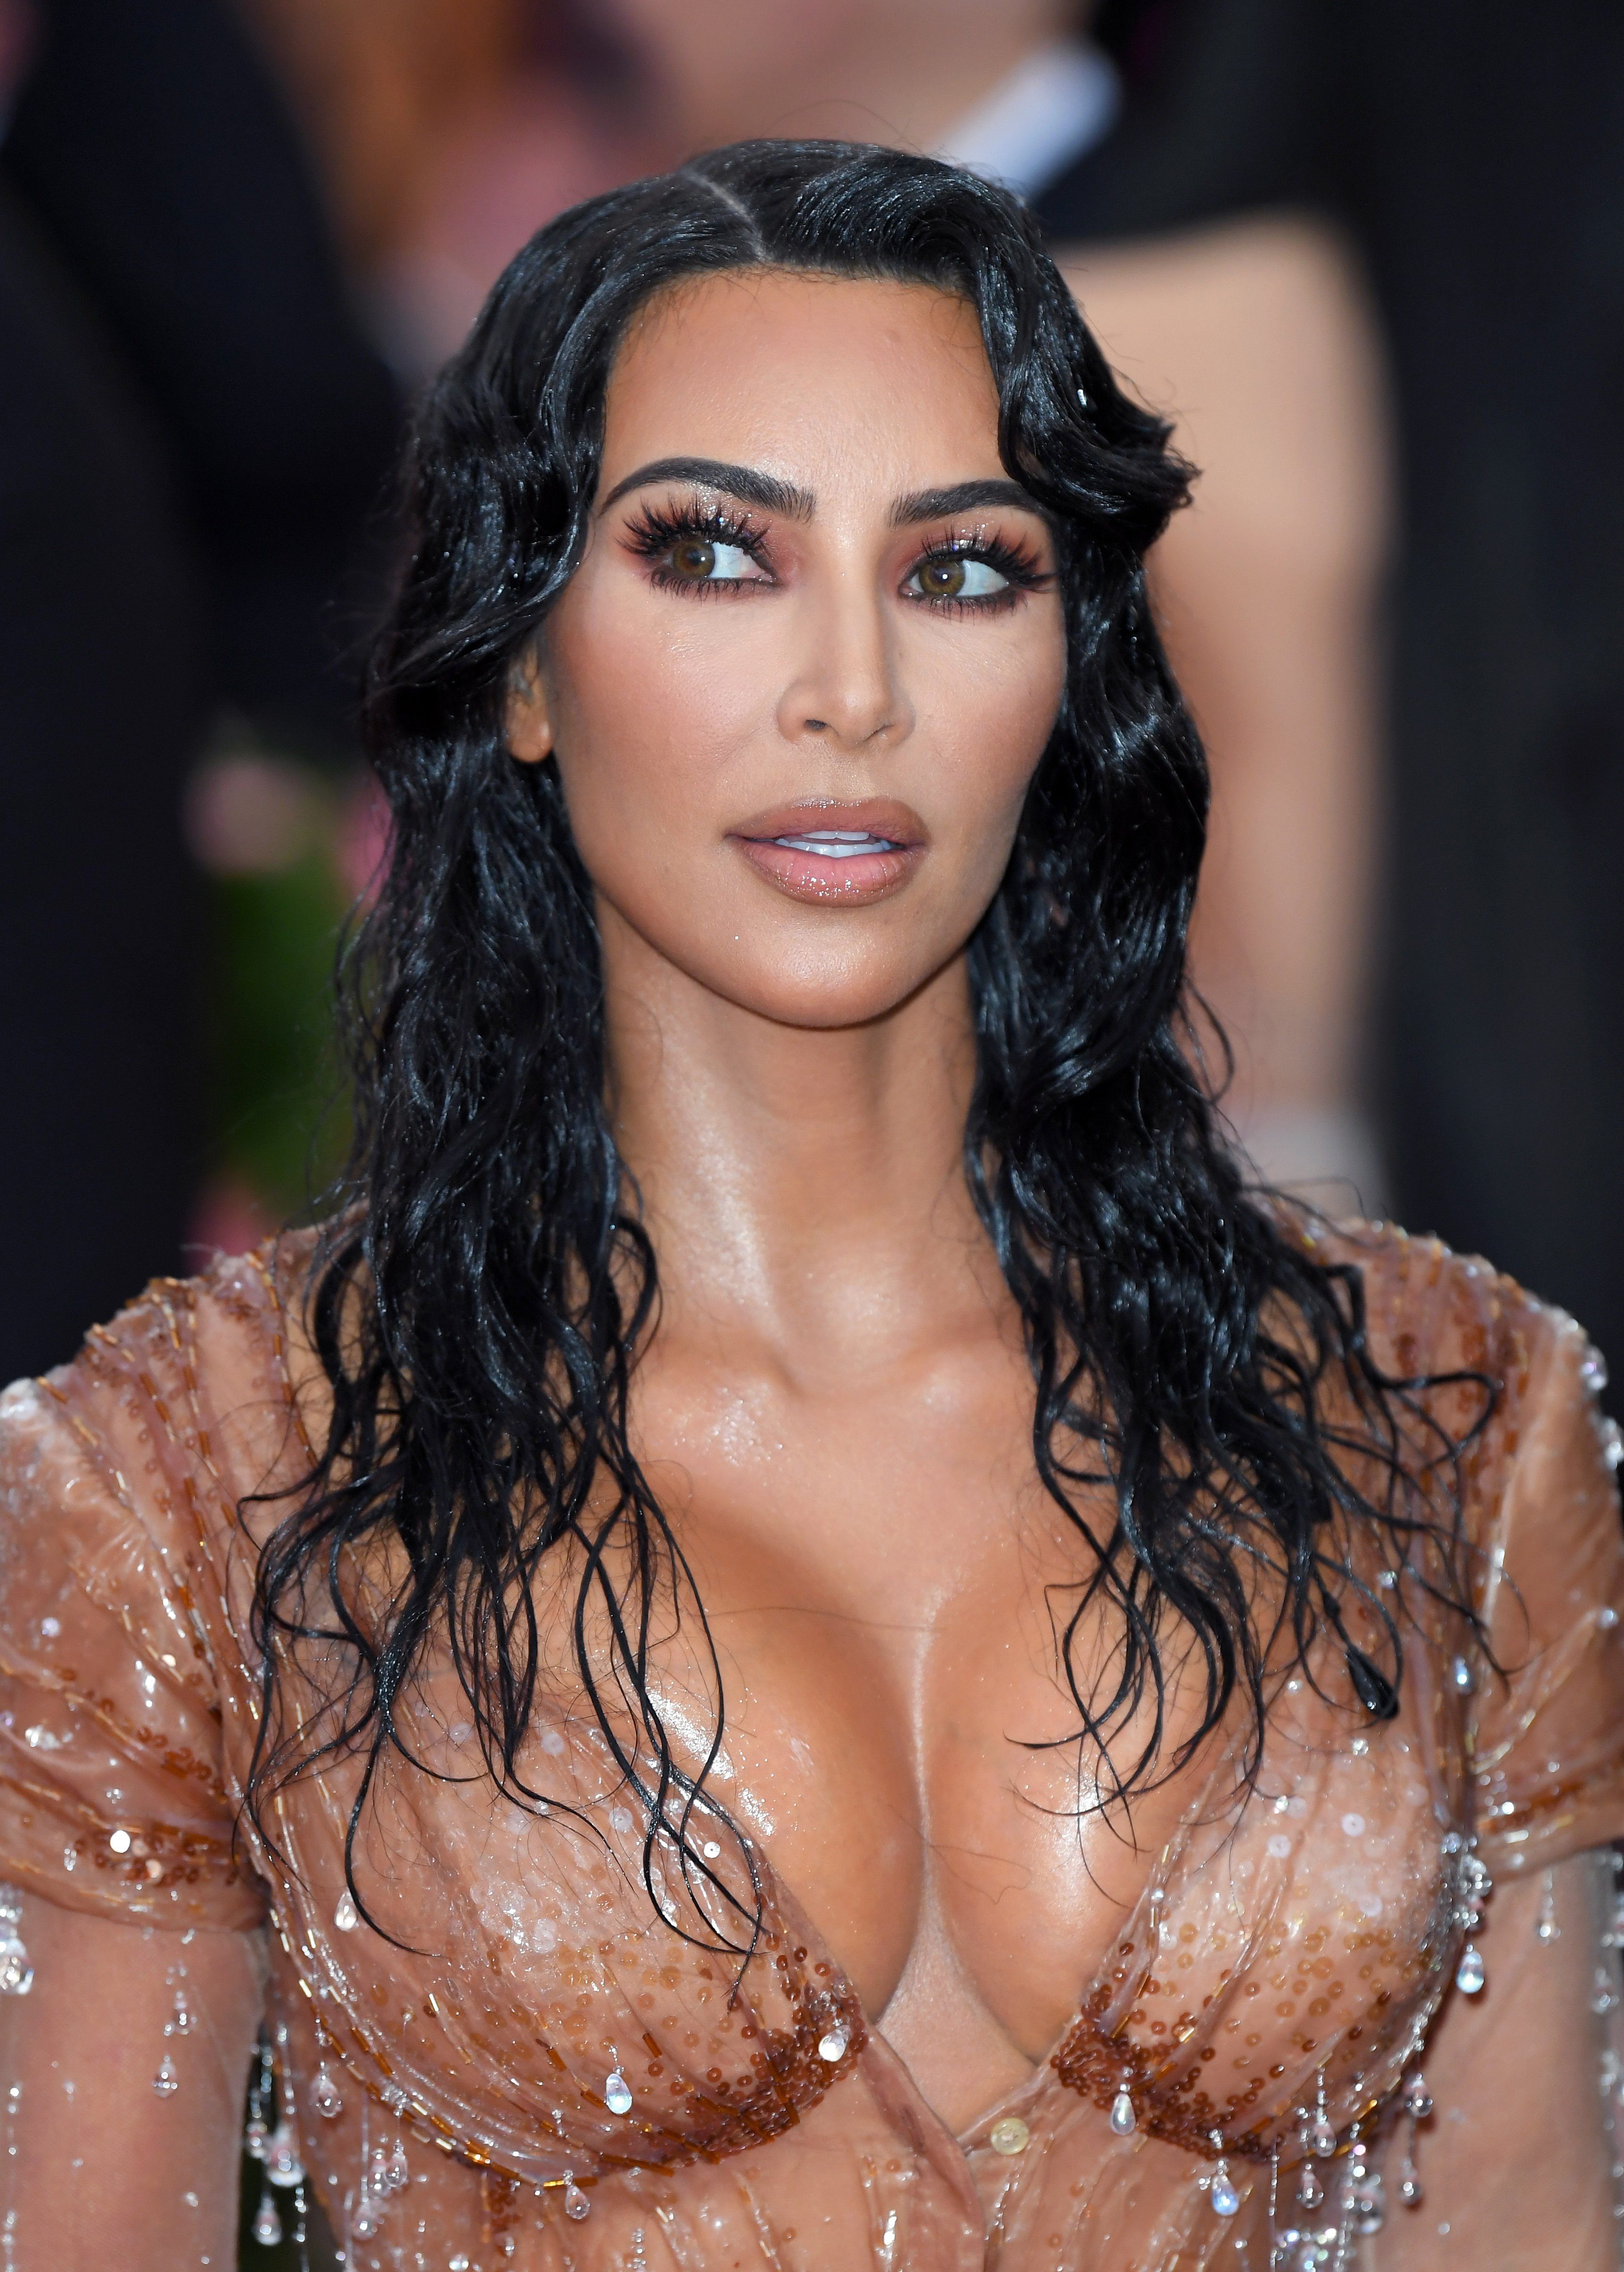 Kim Kardashian poses at the 2019 Met Gala at the Metropolitan Museum of Art on May 06, 2019 in New York City. | Source: Getty Images